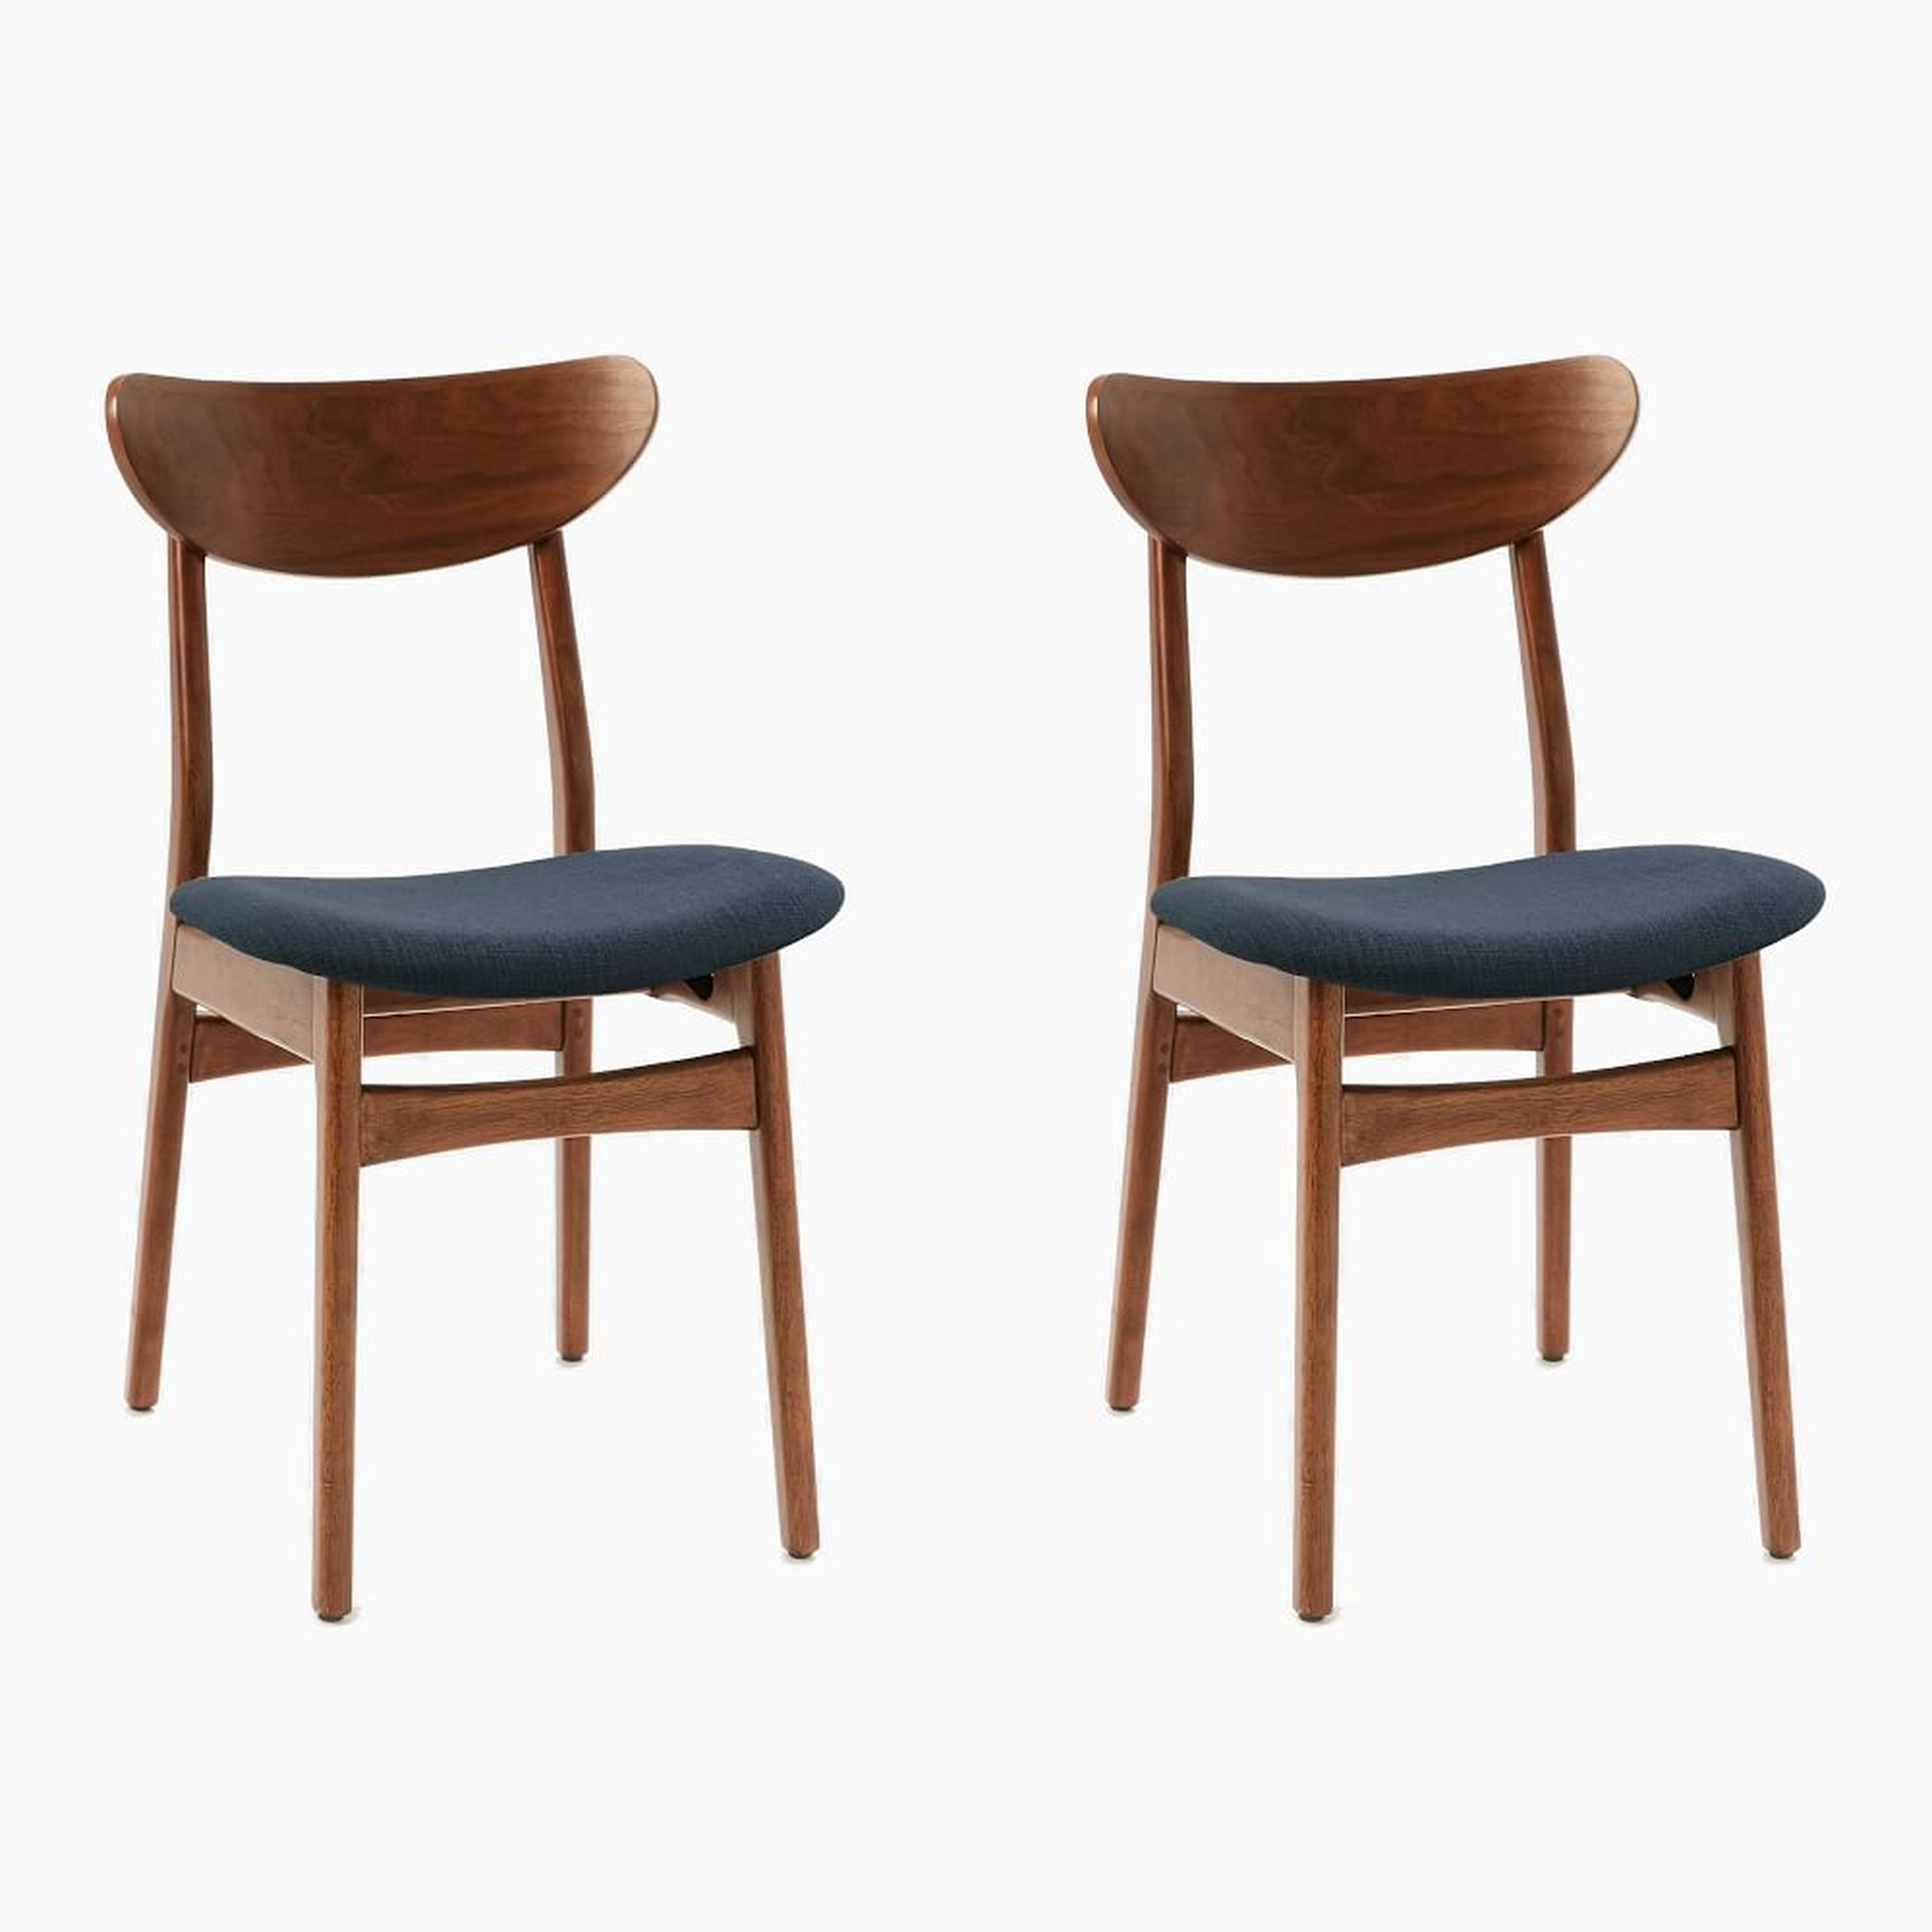 Classic Cafe Upholstered Dining Chair, Nightshade, Walnut, Set of 2 - West Elm